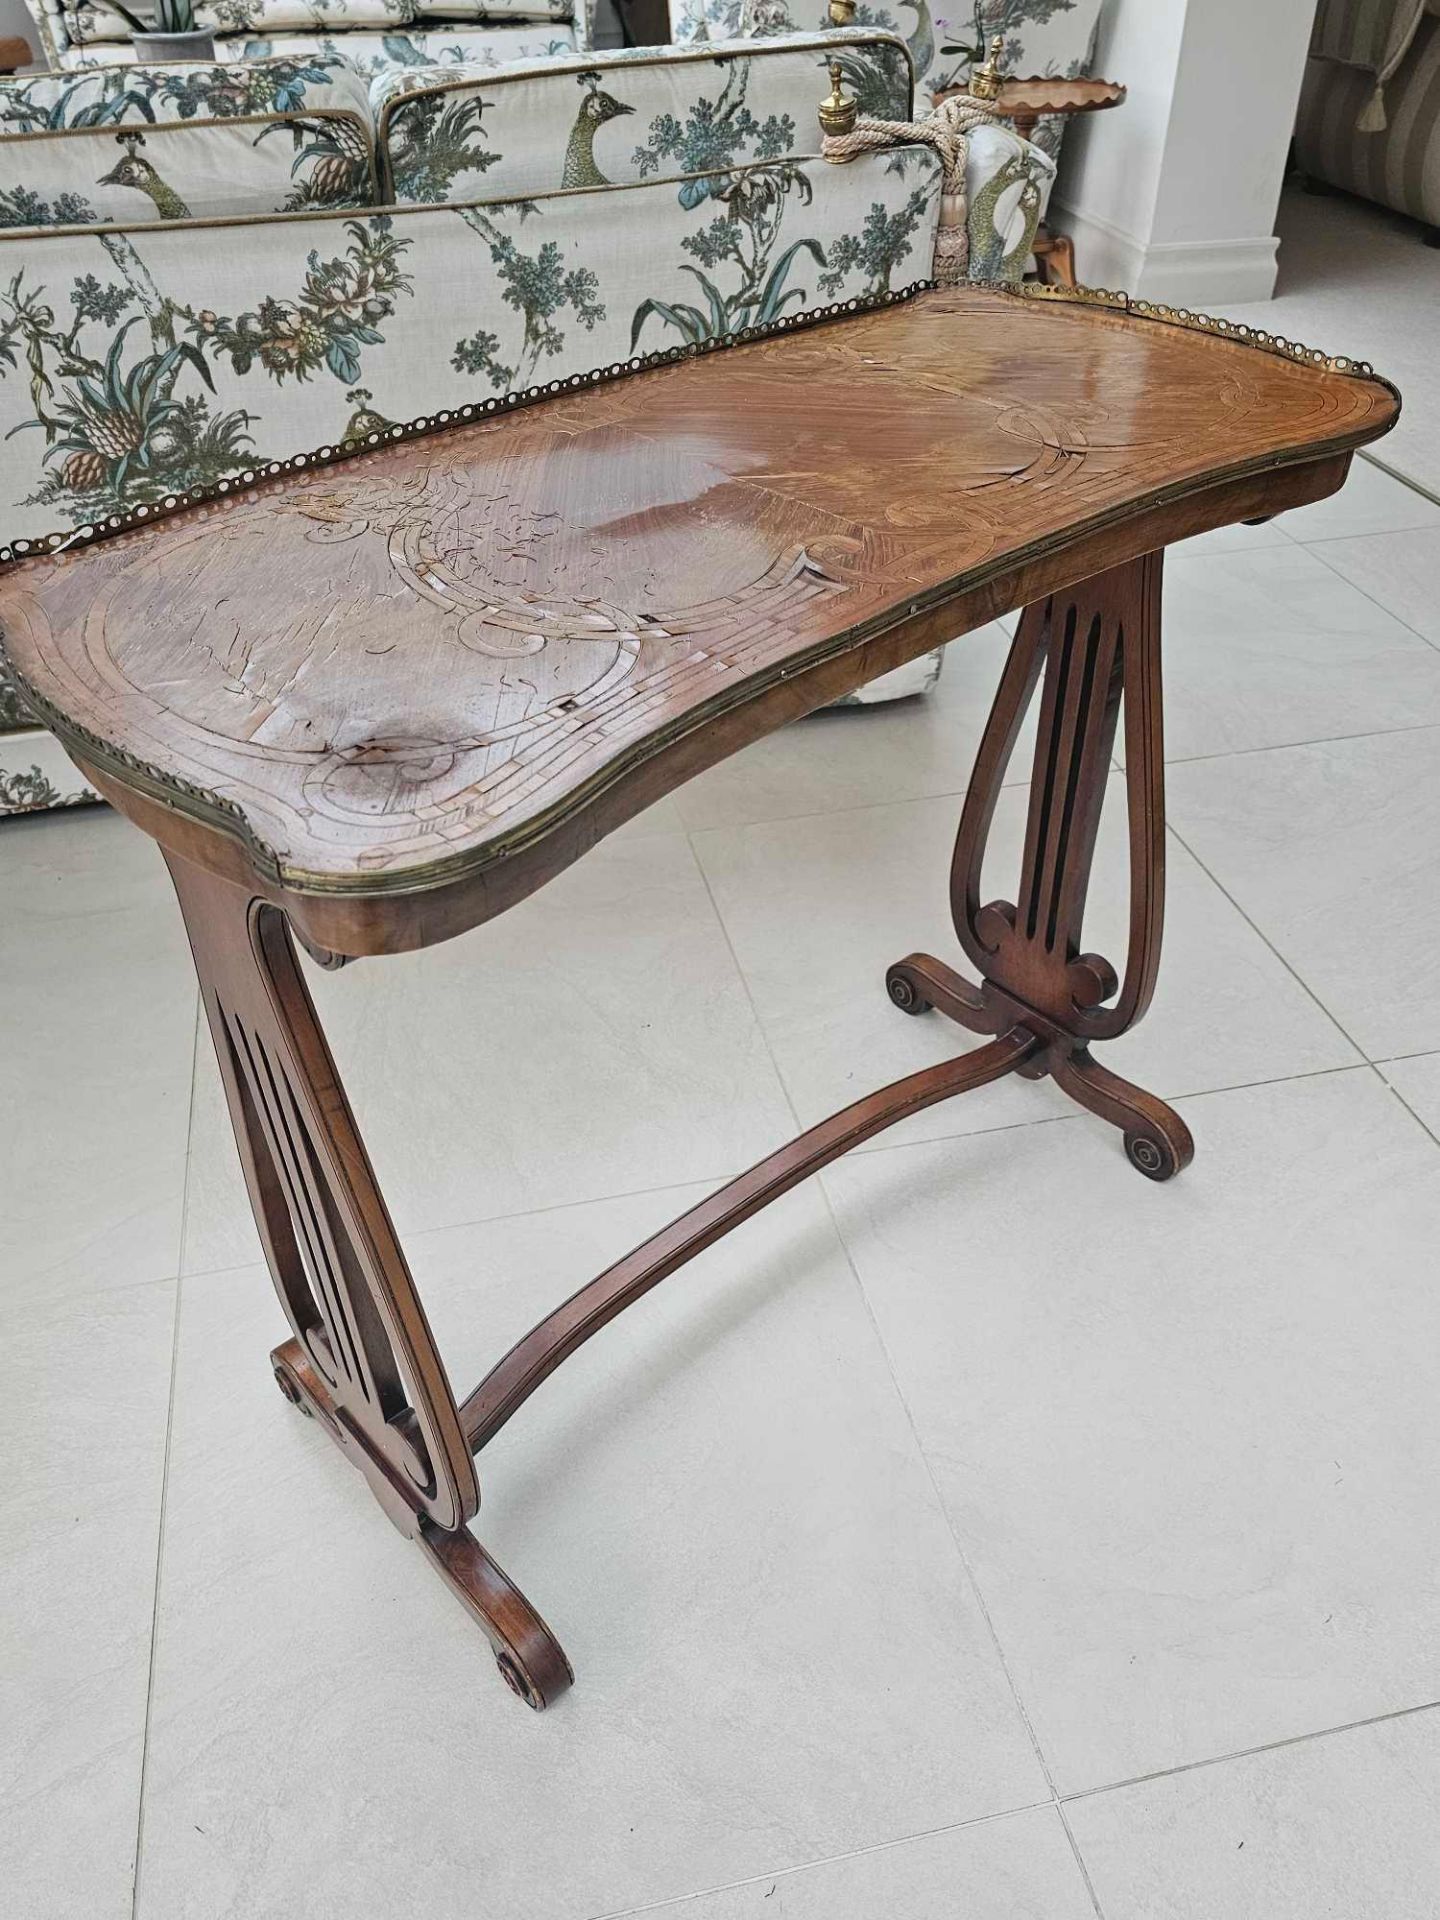 A Louis XVI Style Kingswood And Tulipwood Banded Side Table The Shaped Decorated Top With A - Bild 5 aus 5